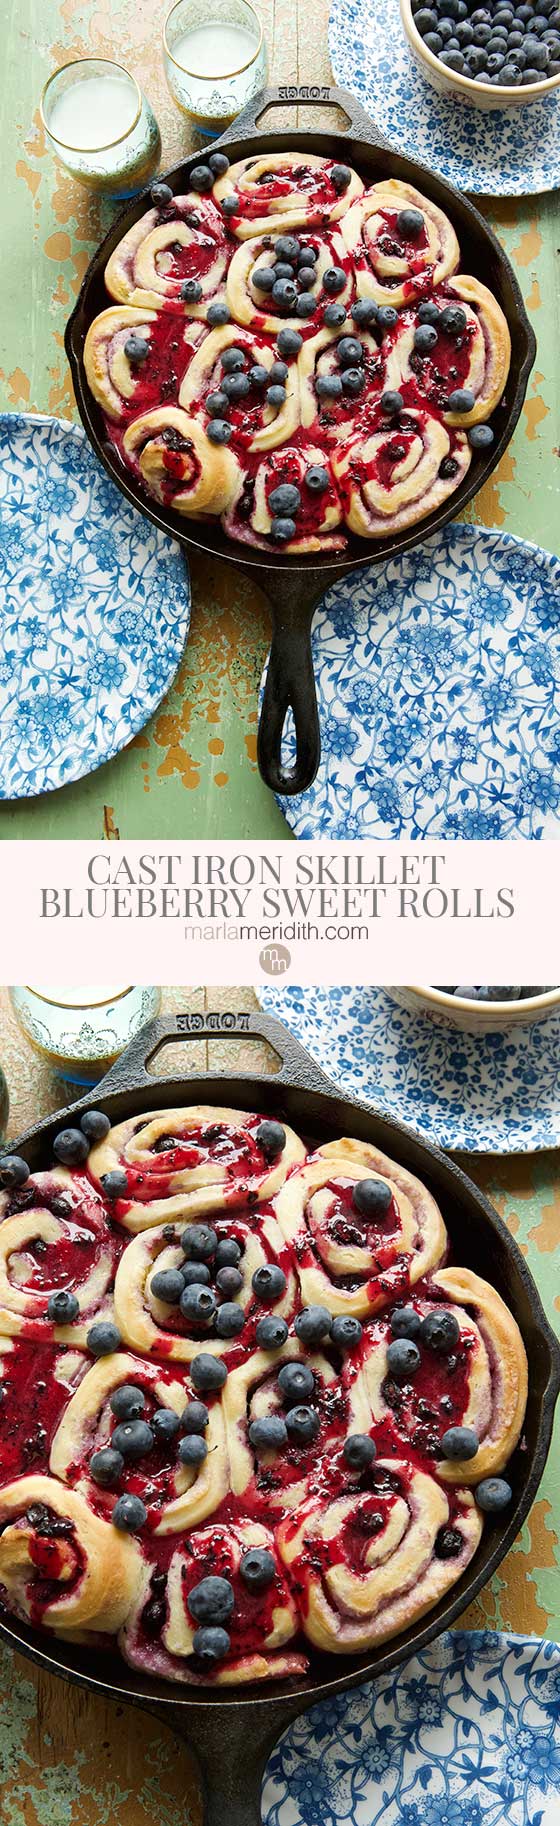 Everyone will love these Delicious Cast-Iron Skillet Blueberry Sweet Rolls. The recipe is super simple and the homemade sweet roll dough is a must! MarlaMeridith.com